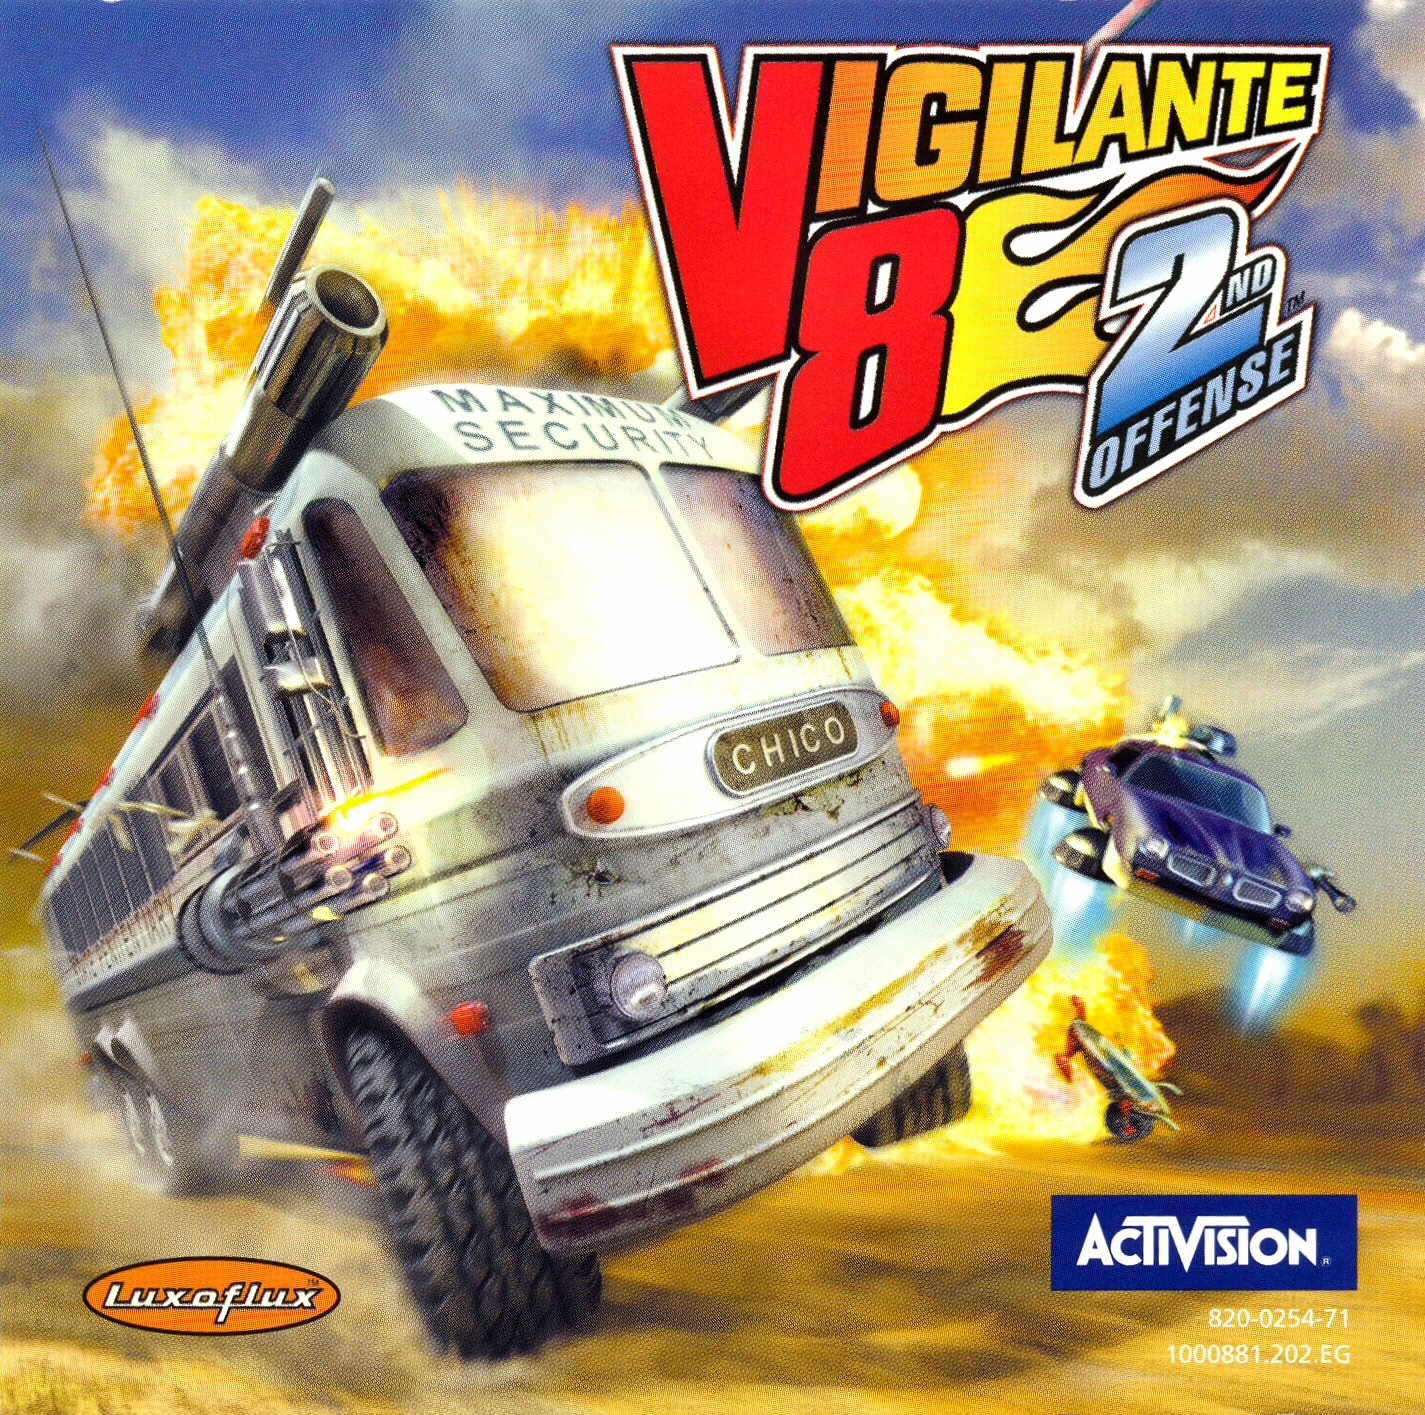 Vigilante 8 2nd Offense (PAL) Front Cover - Click for full size image